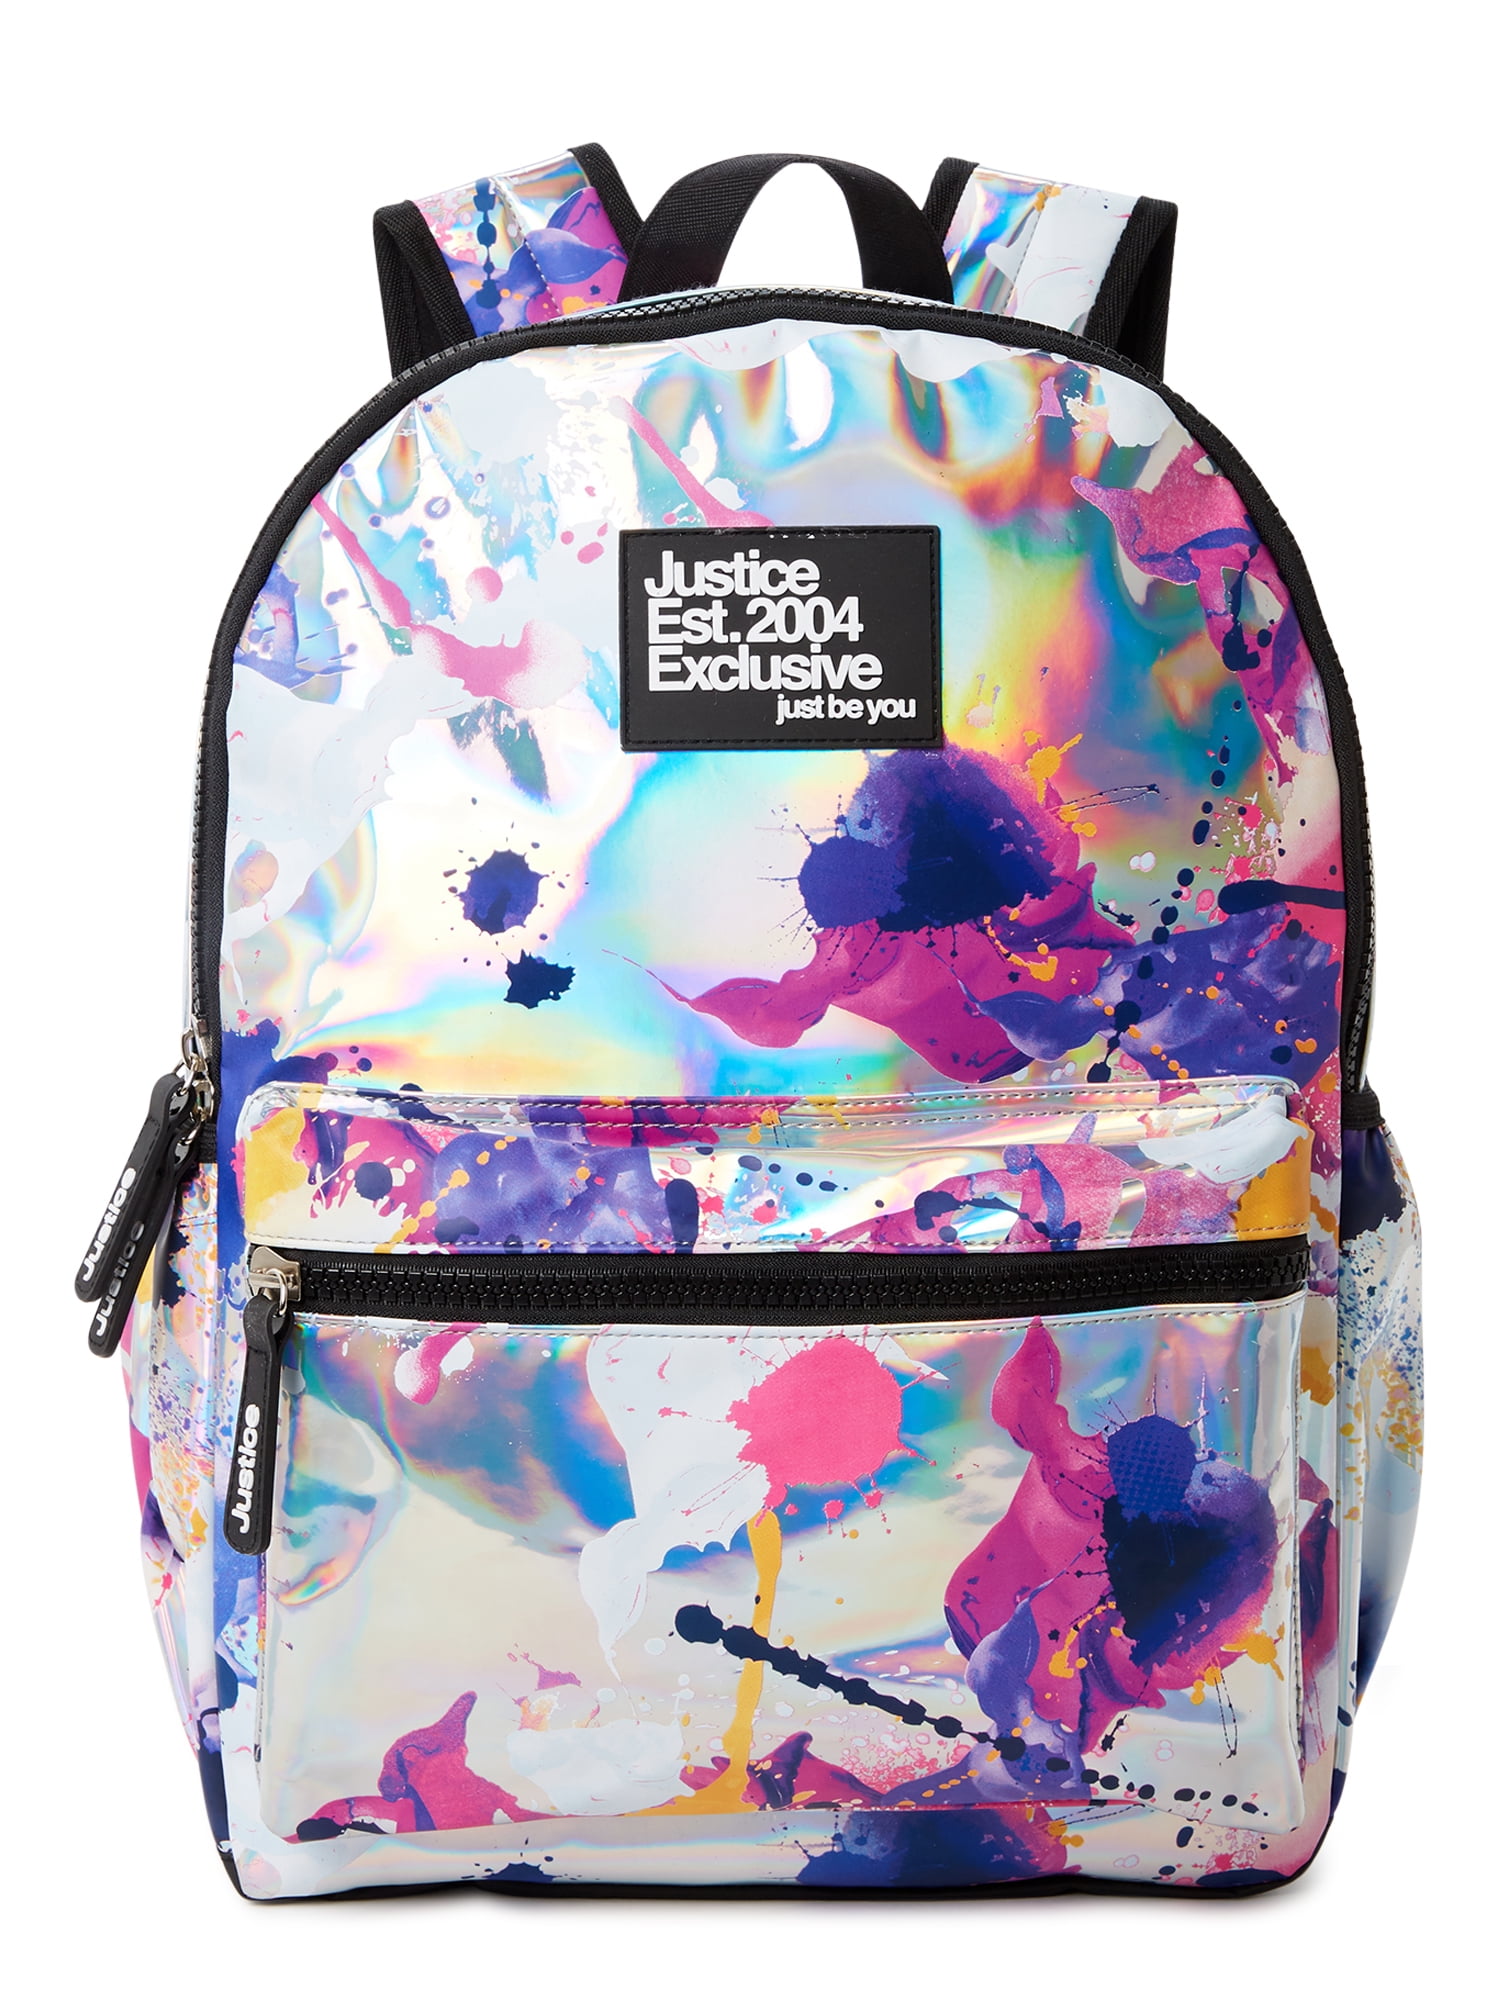 Justice Girls 17 Laptop Backpack Iridescent Silver Multi-Color